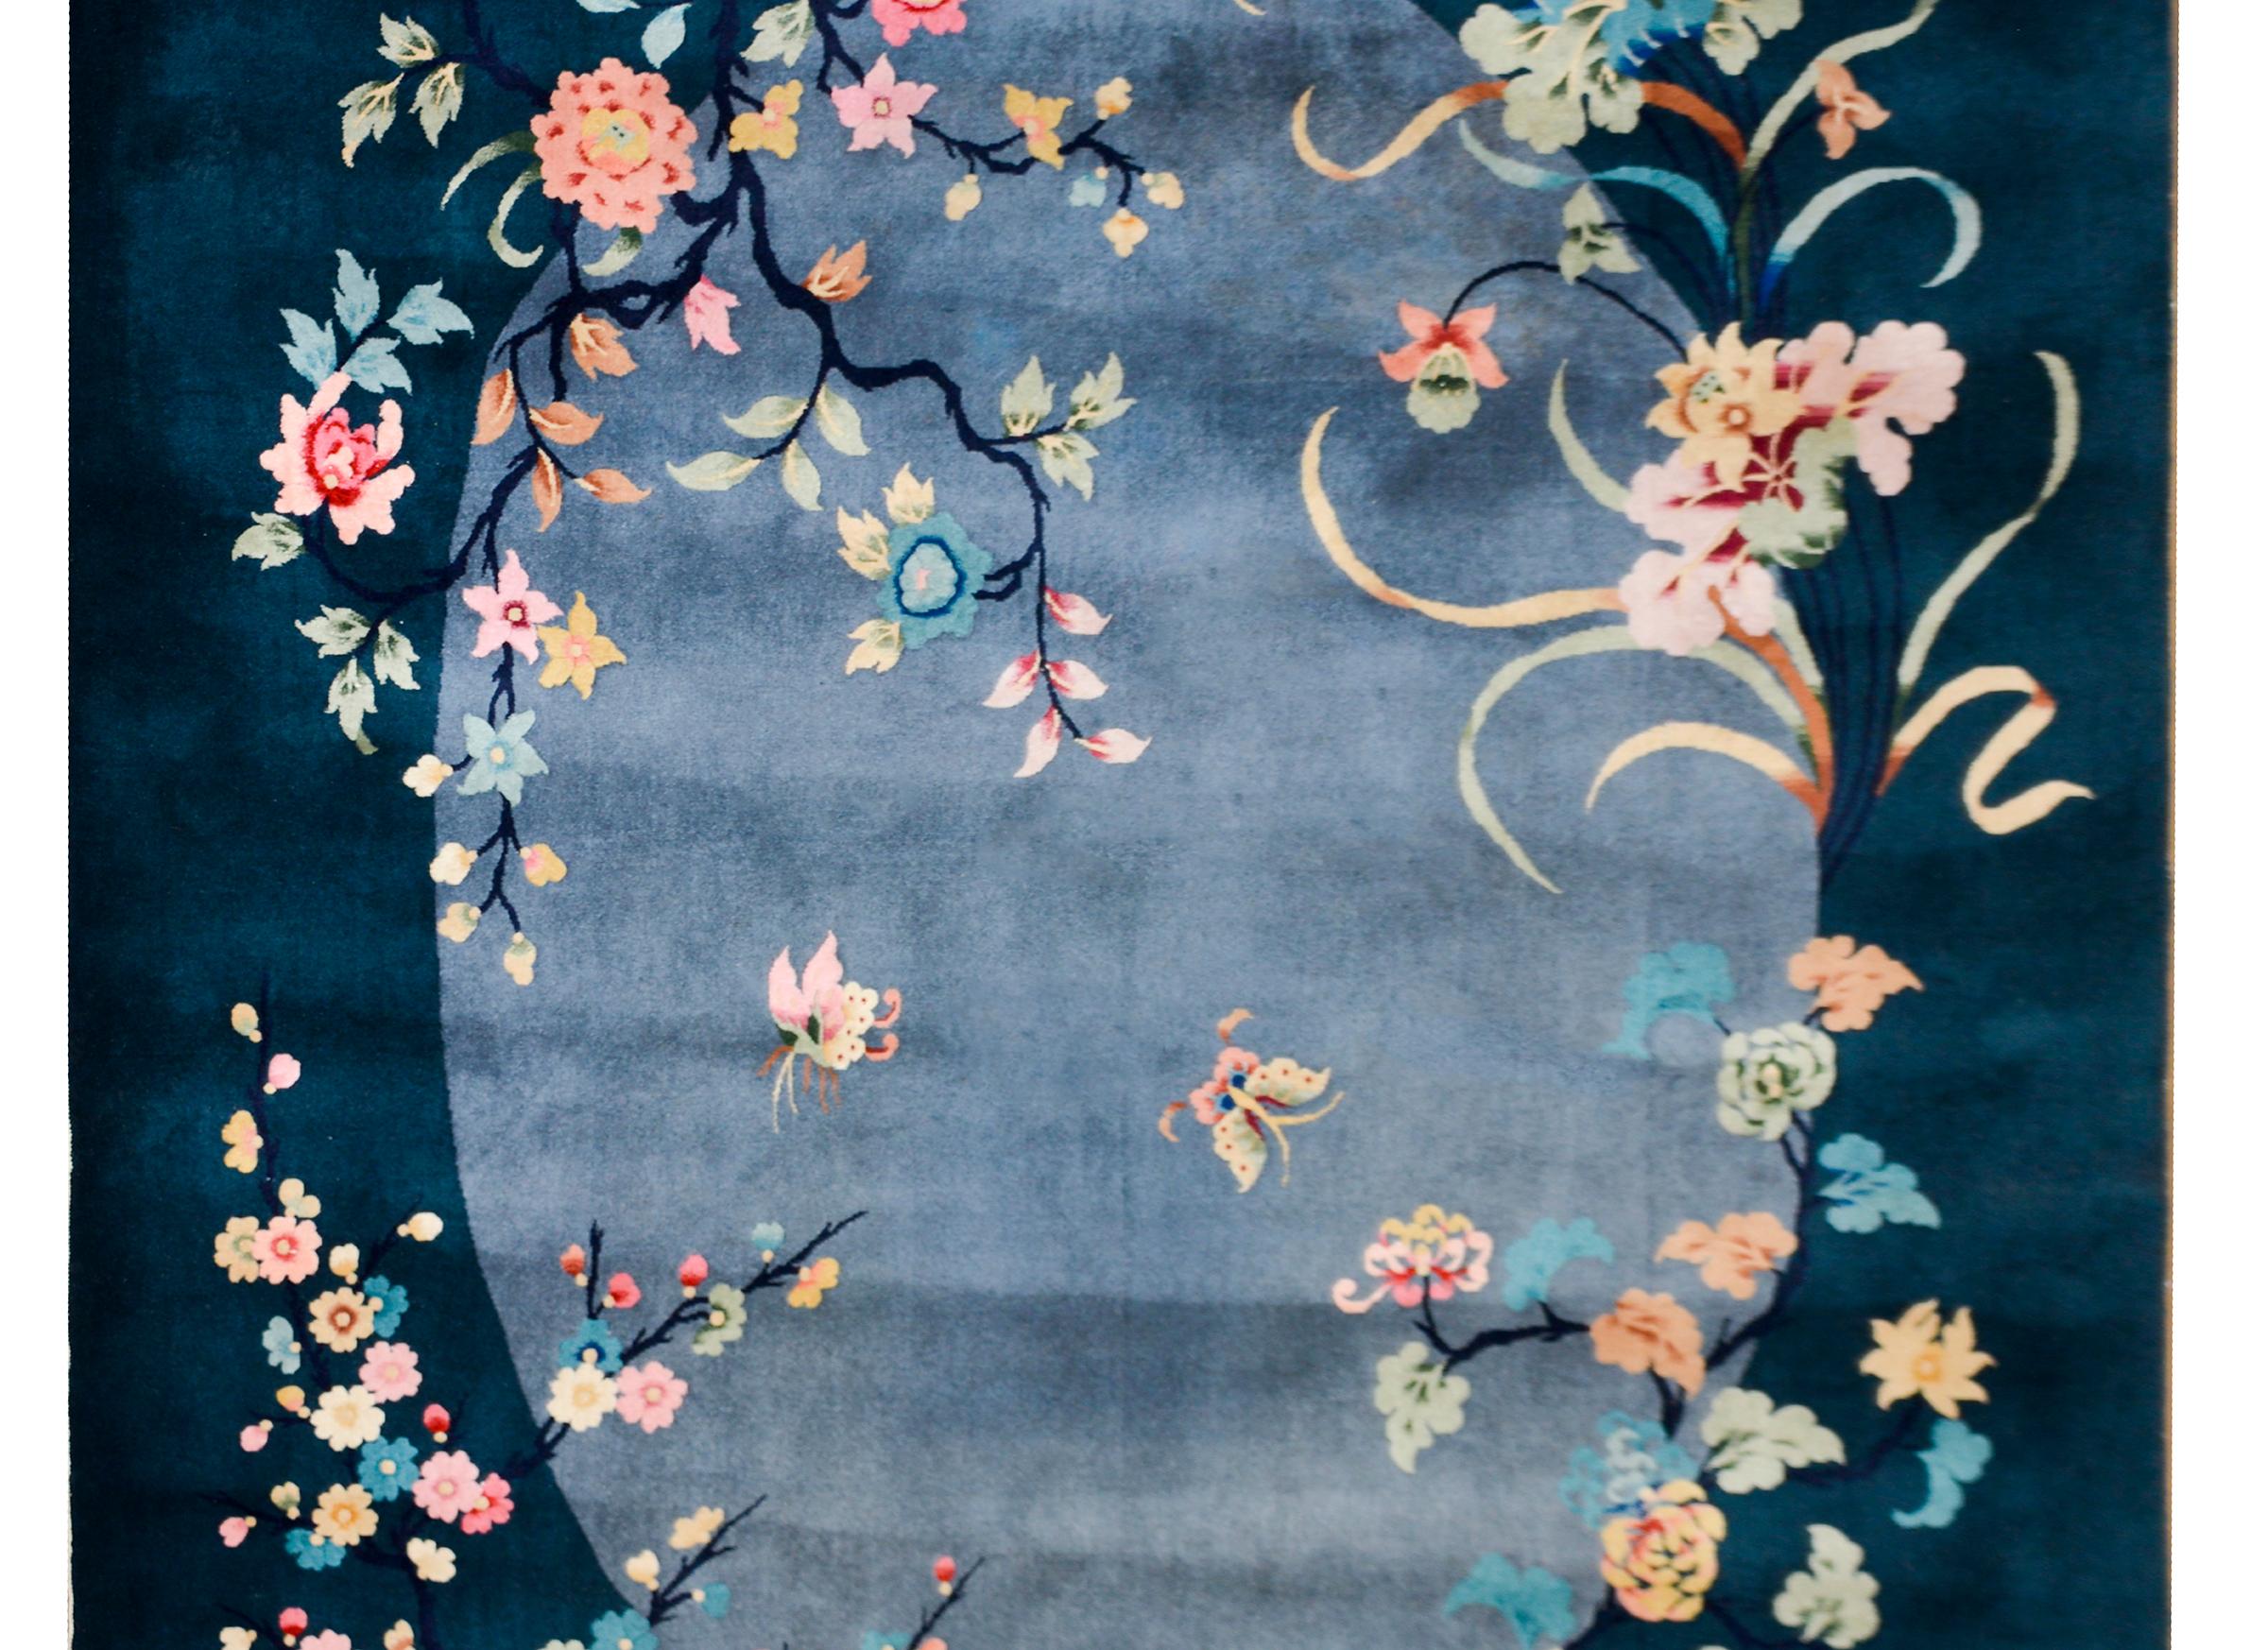 A beautiful early 20th century Chinese Art Deco rug with a dark indigo border surrounded a gray oval medallion overlaid with multi-colored peonies, lotus, chrysanthemum, and sherry blossoms, presenting the four seasons.